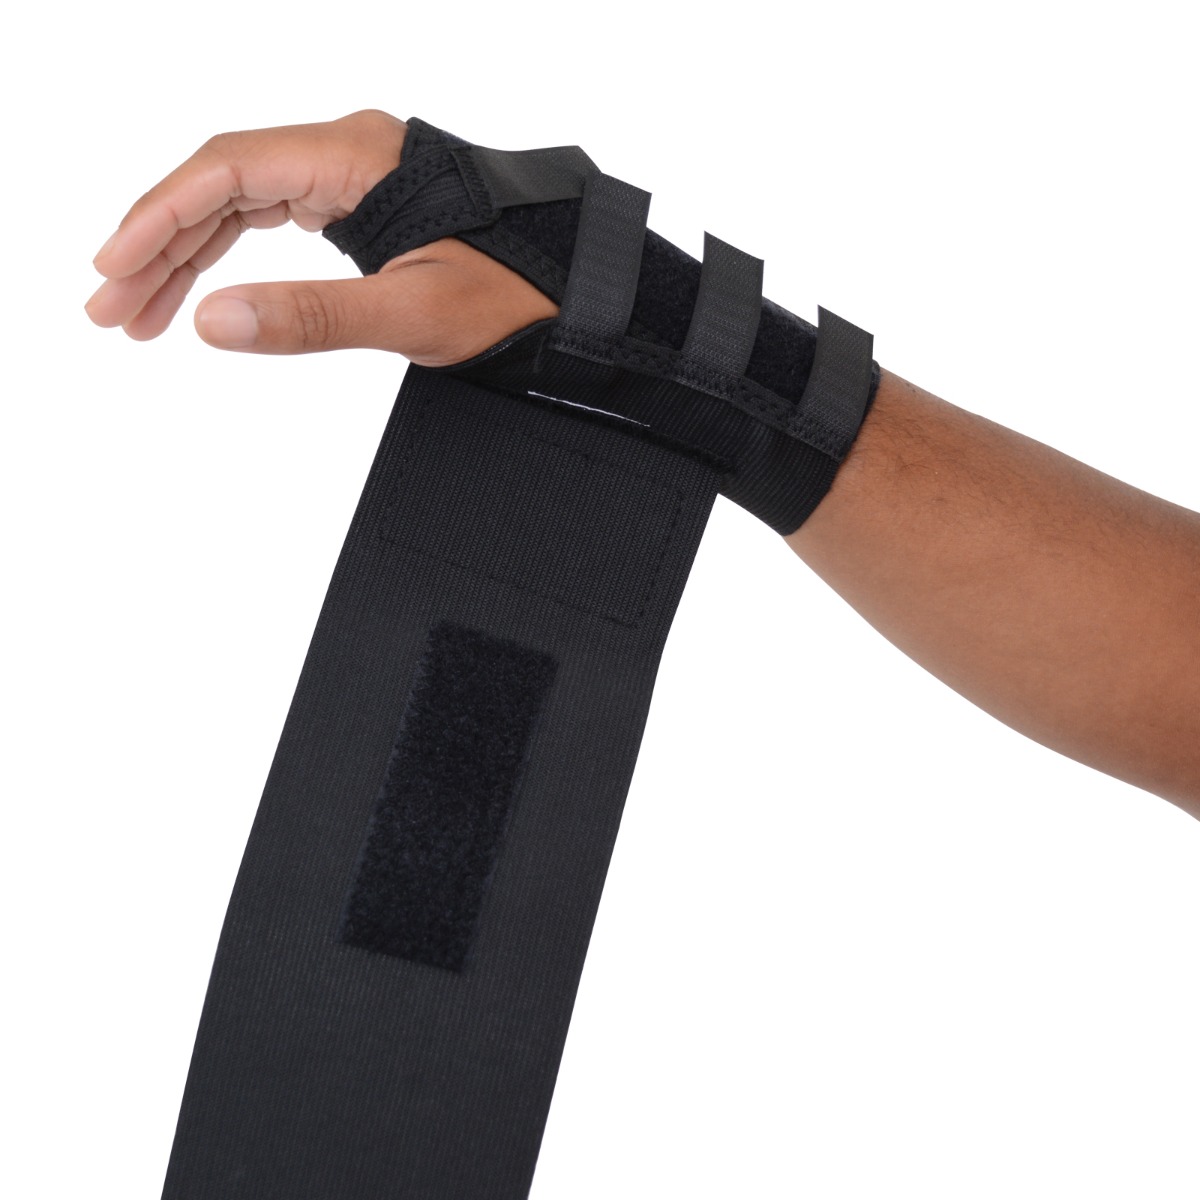 Rolyan Elastic Wrist Support with Tension Strap